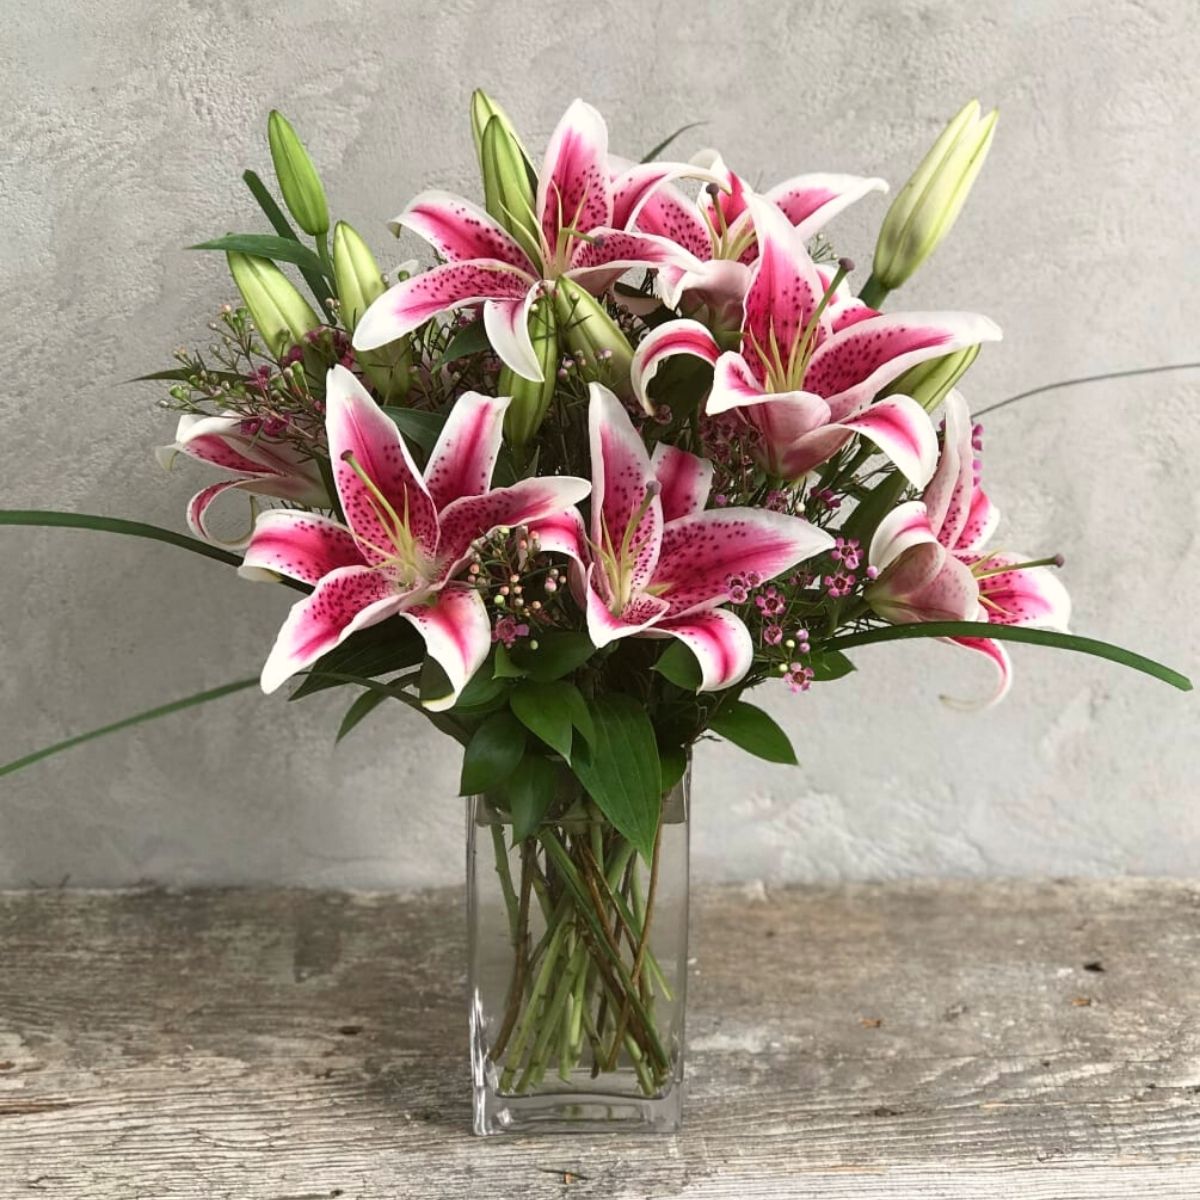 Breast cancer awareness month starfighter lilies are a great flower option on Thursd